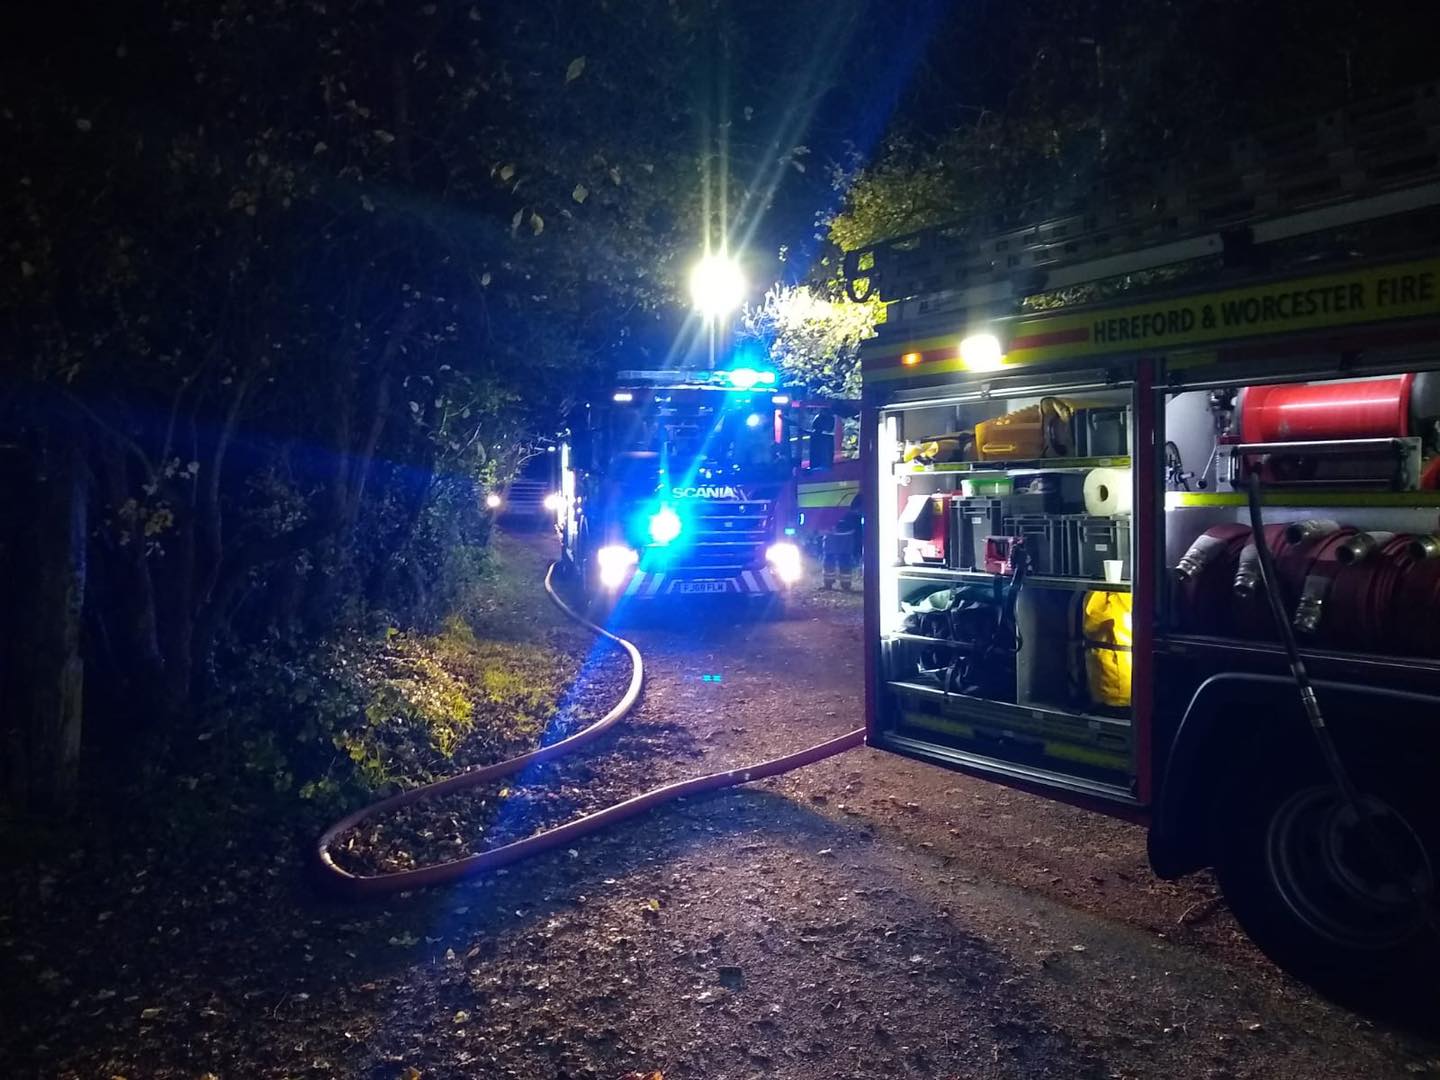 NEWS | Fire crews from across North Herefordshire tackle house fire near Leominster